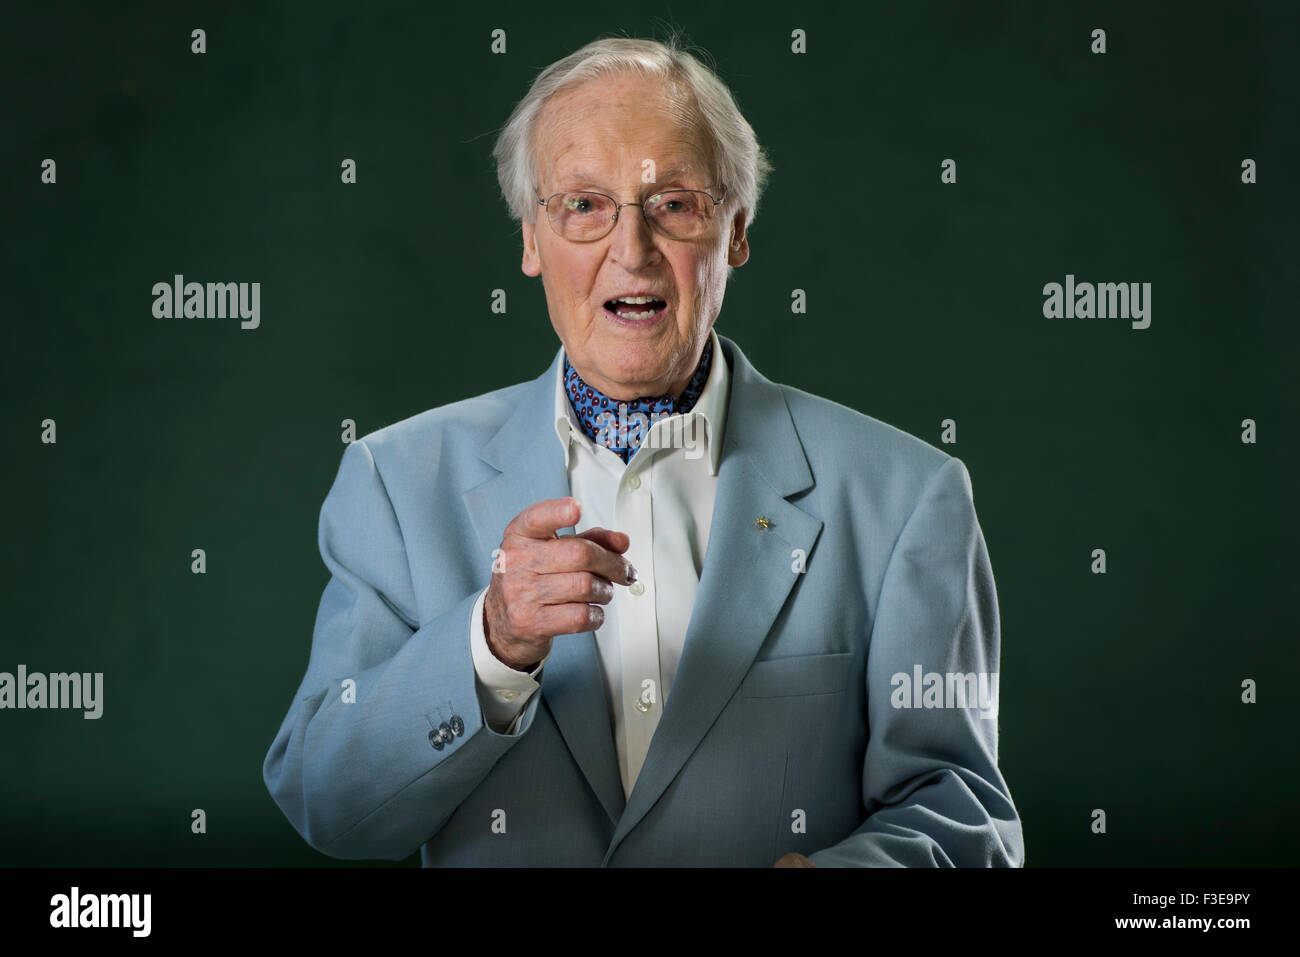 English radio and television presenter and actor Nicholas Parsons. Stock Photo